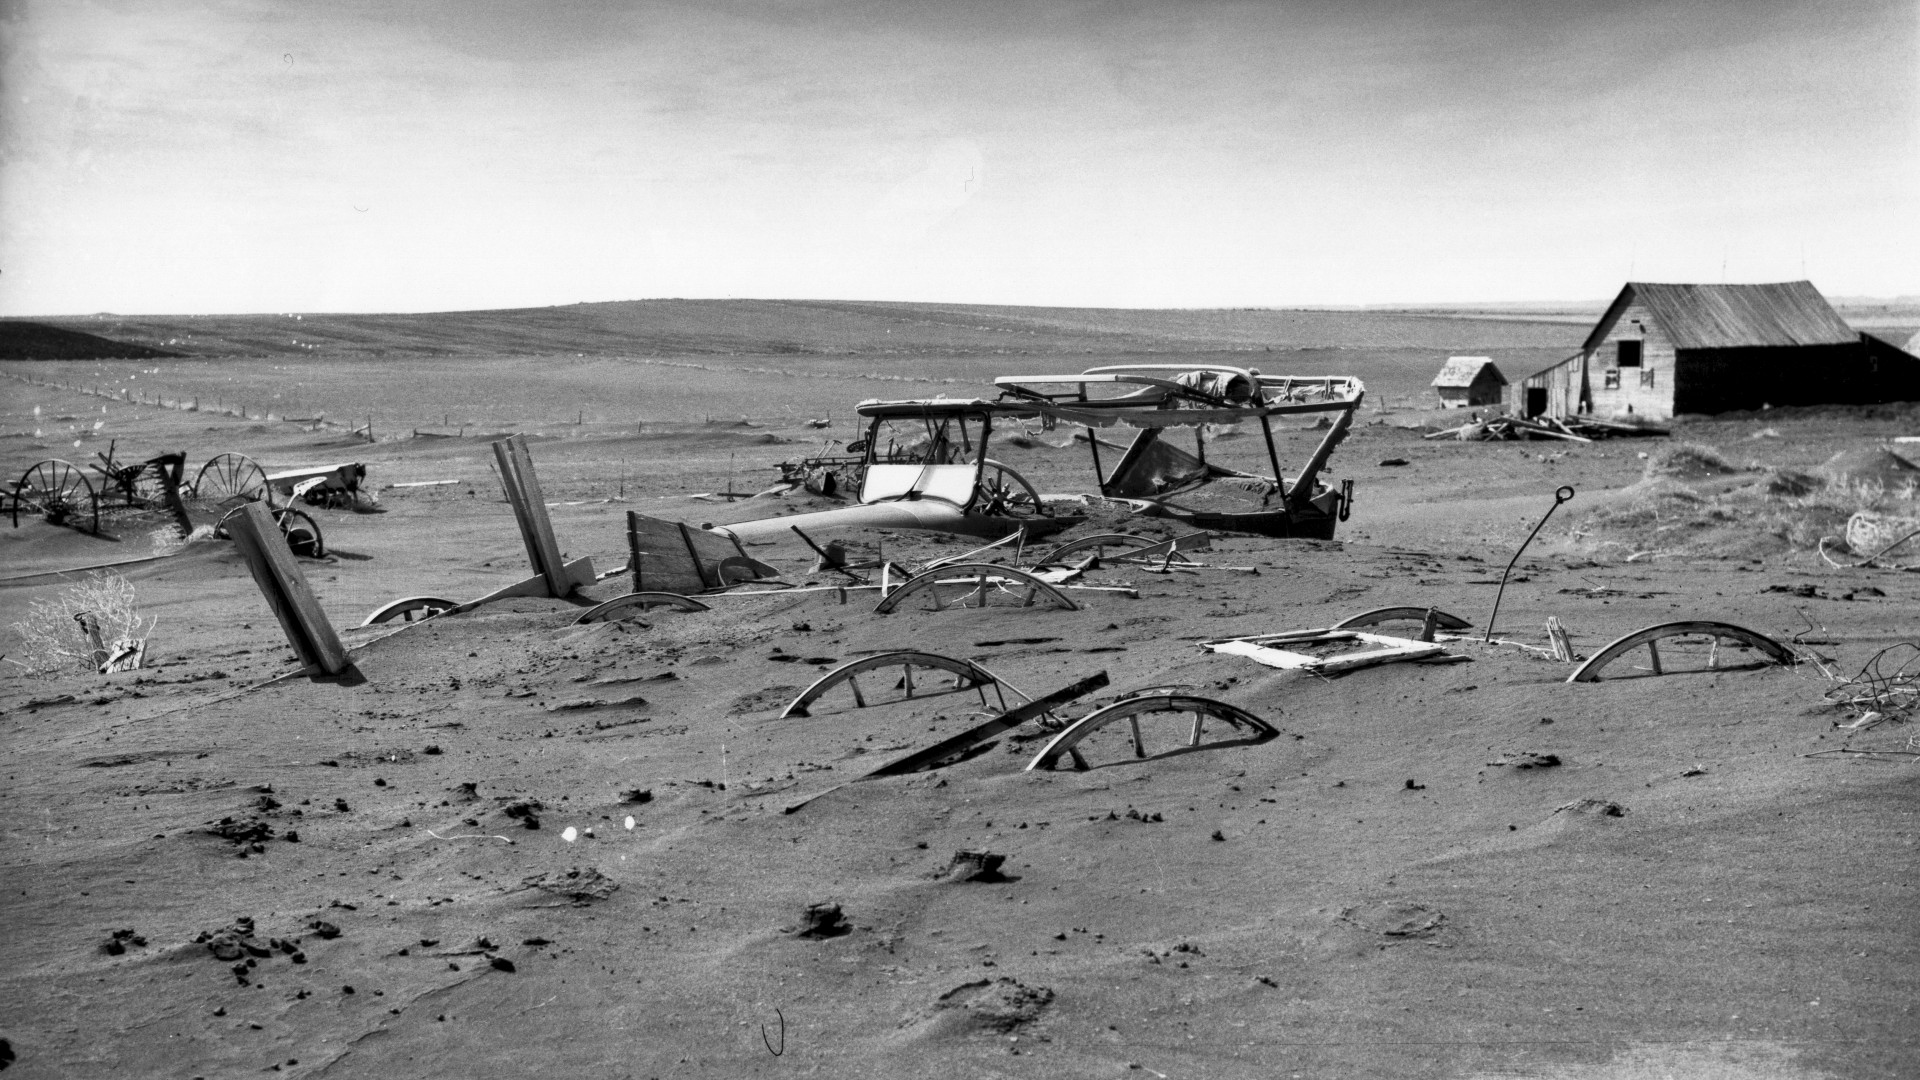 Damage caused during the Dust Bowl of the 1930's